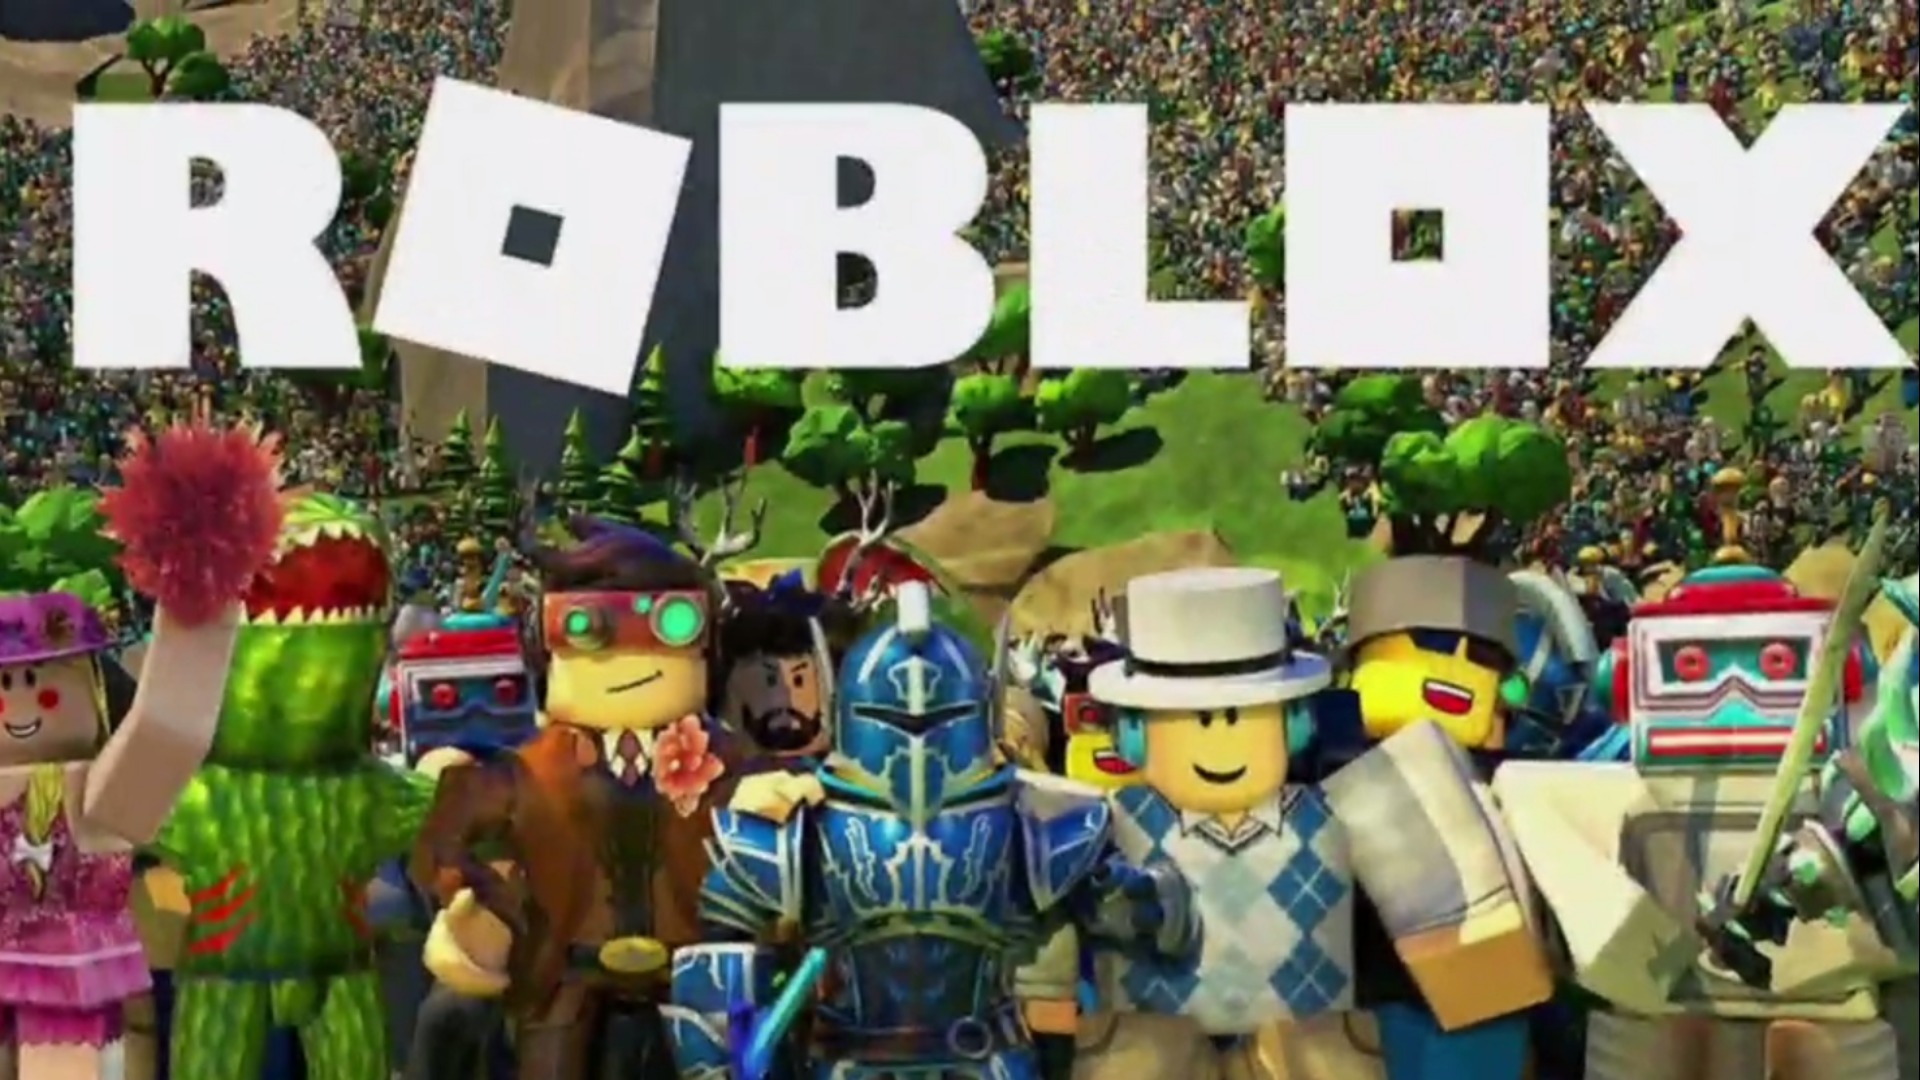 New Questions About Some Inappropriate Content On The Gaming Platform Roblox Video - roblox kissing videos